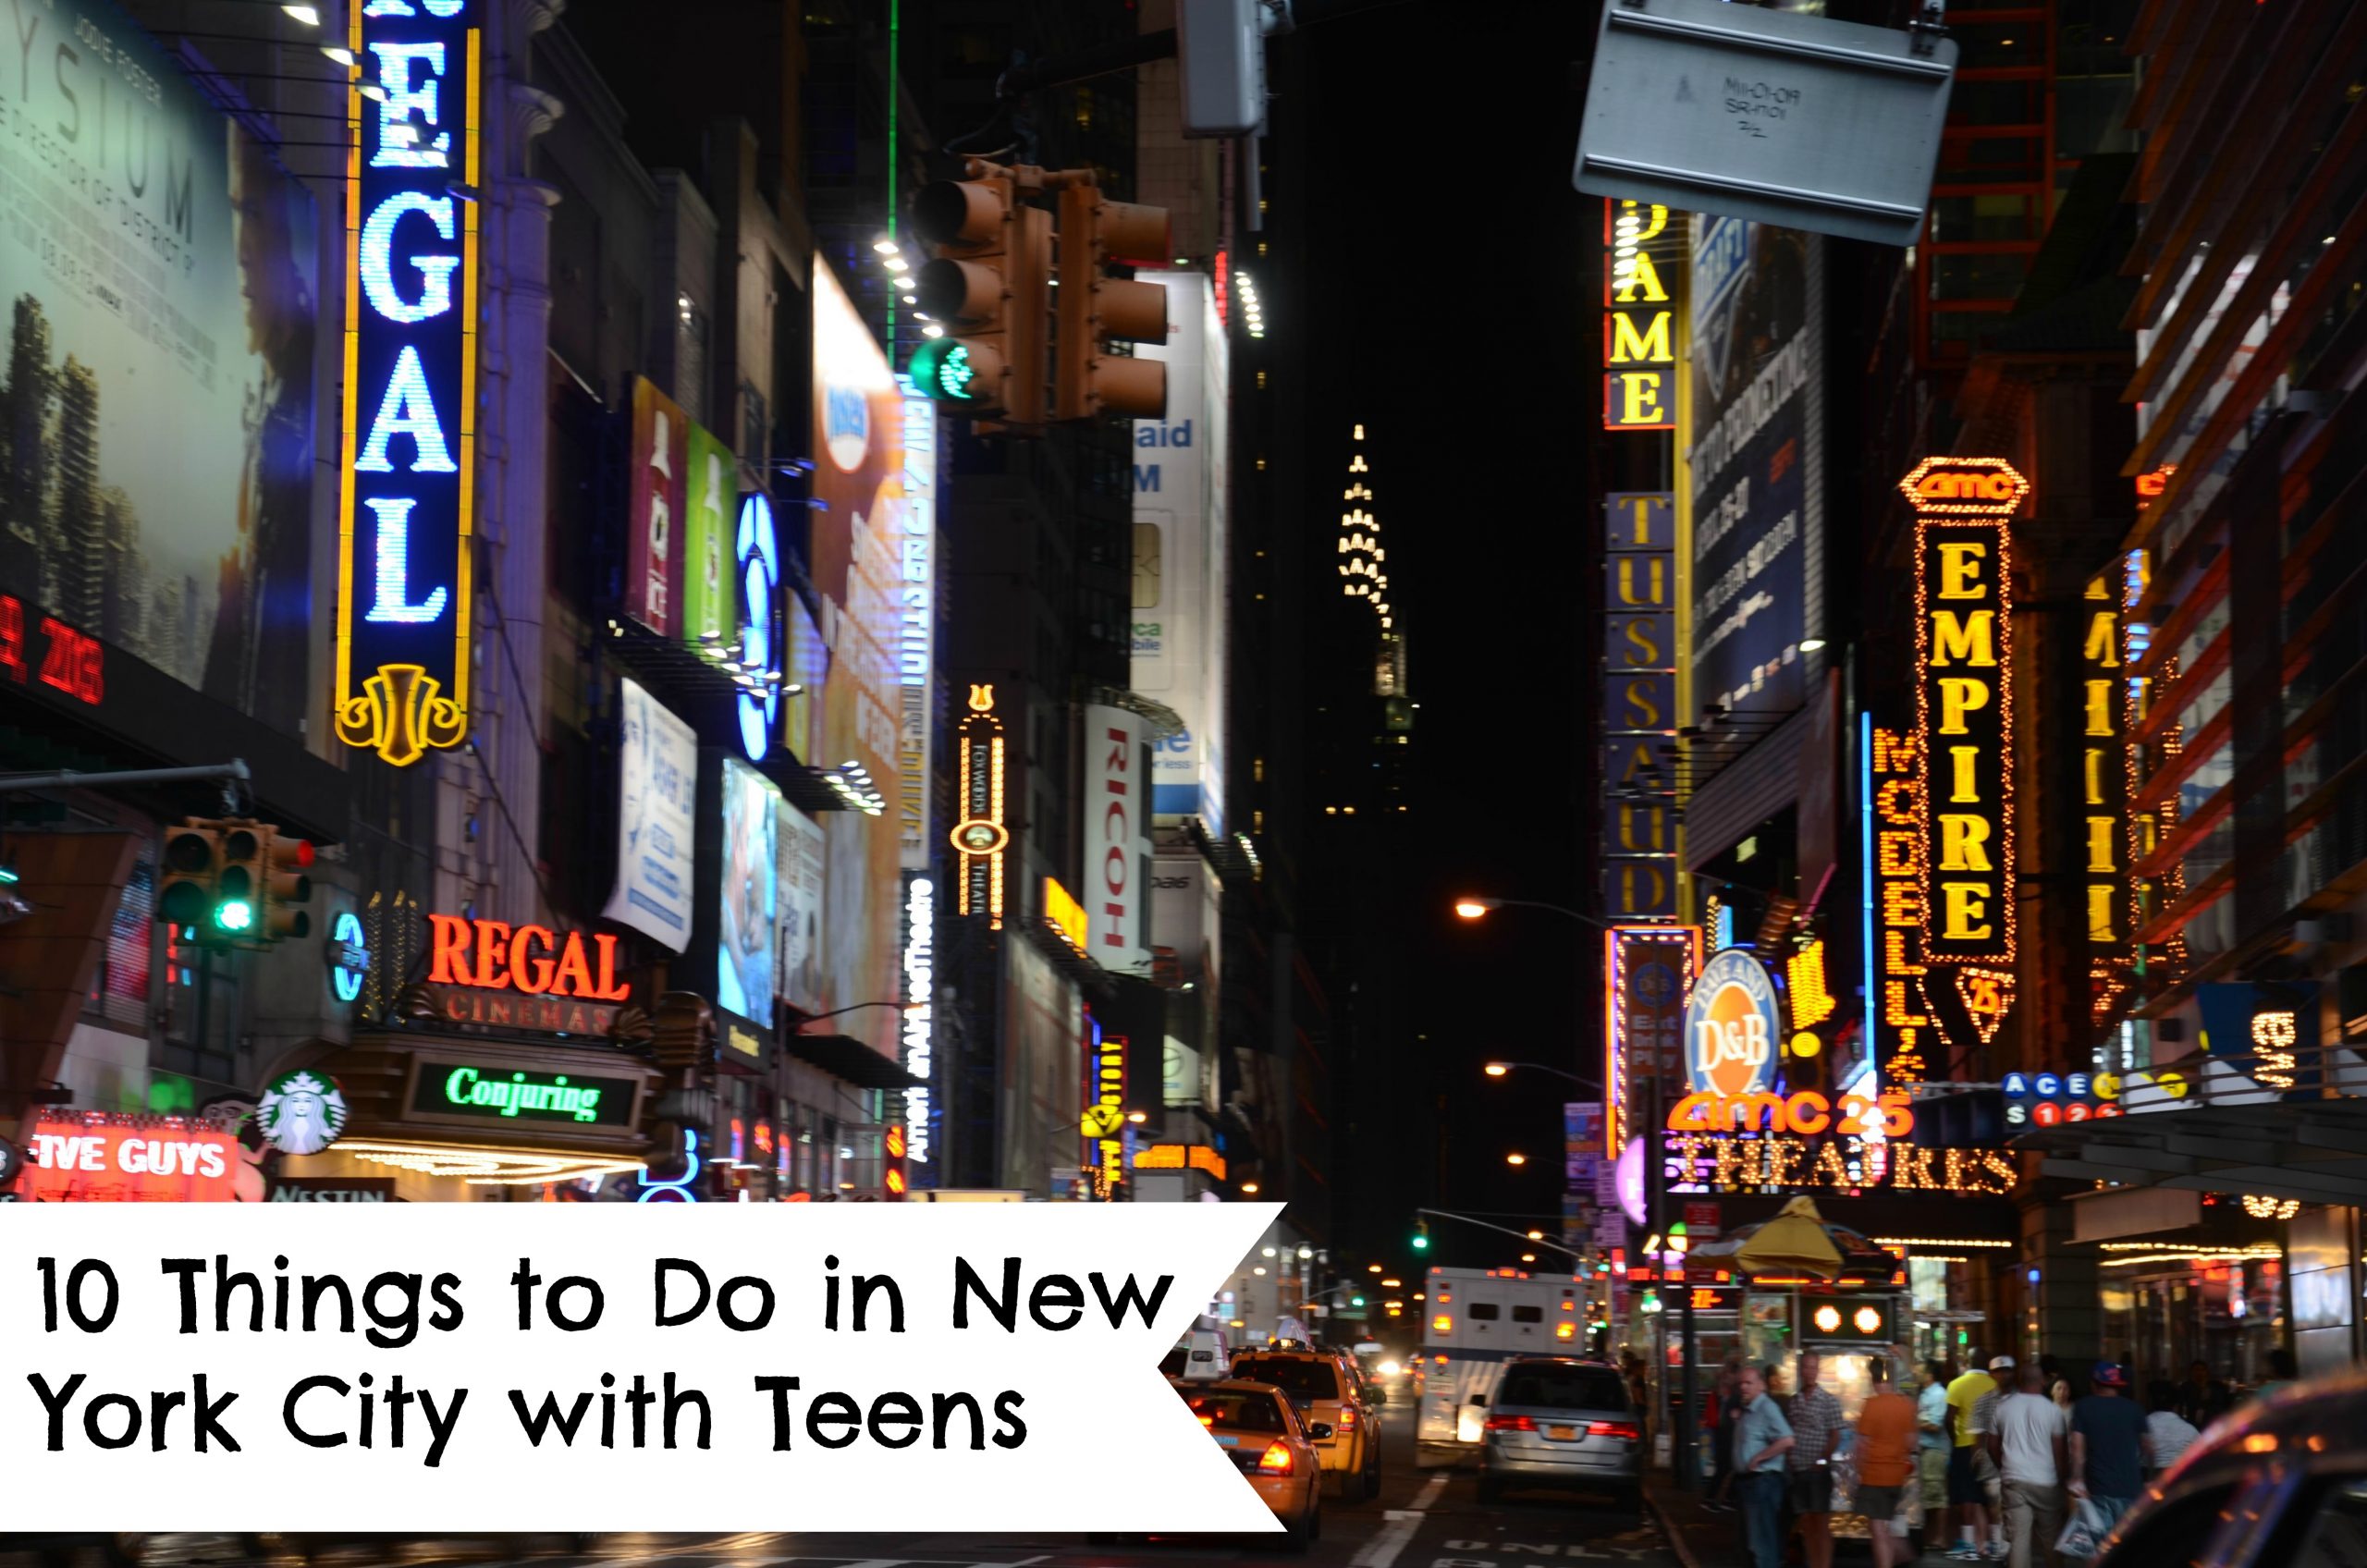 10 Things to Do in New York City With Teens